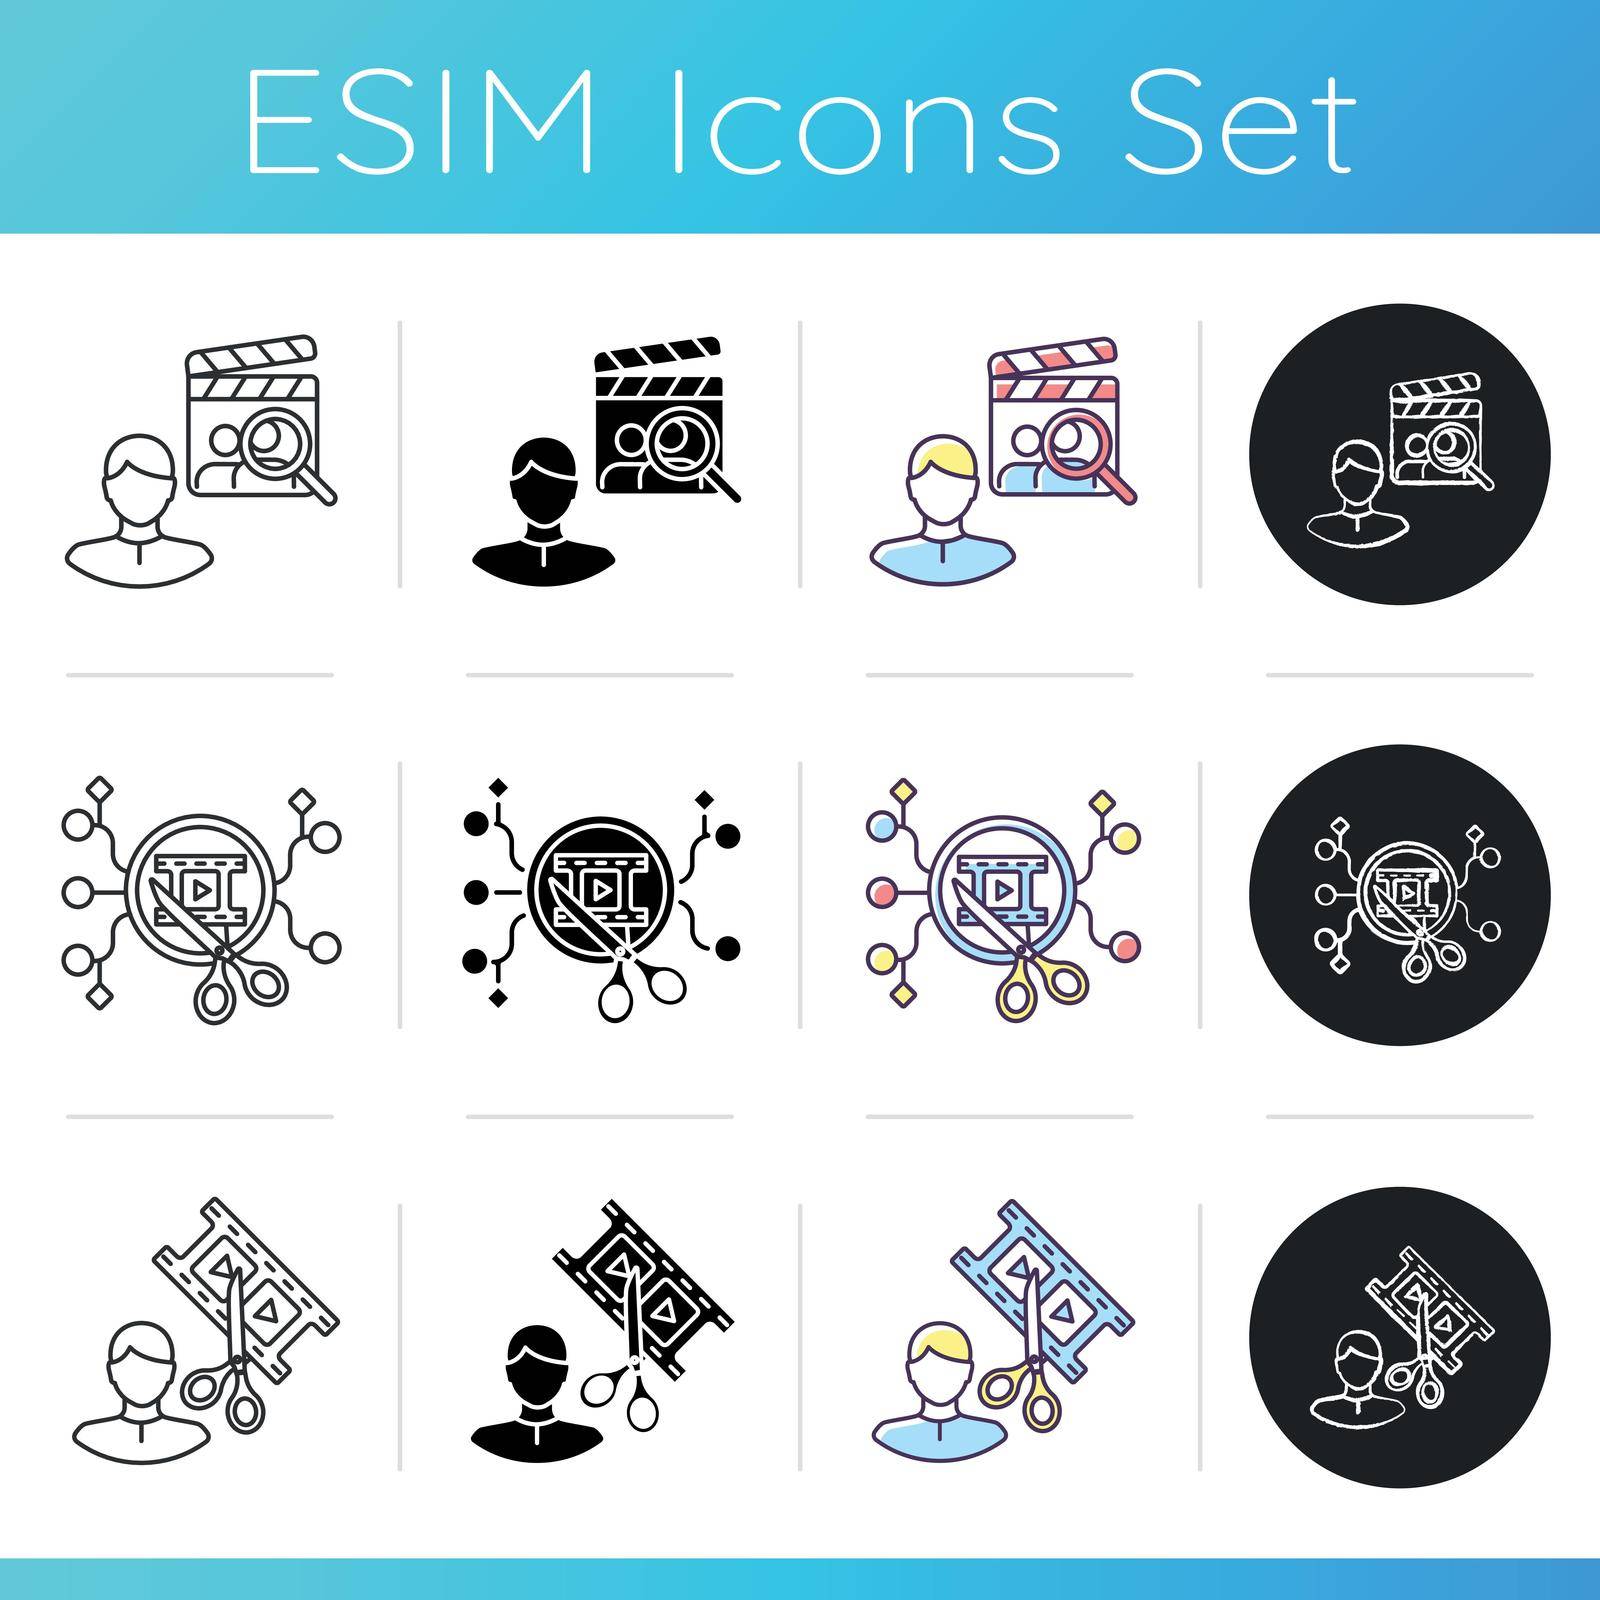 Filmmaking icons set. Director of casting. Project leader recruit actors. Ai editing for filmmaking. Professional editor. Linear, black and RGB color styles. Isolated vector illustrations